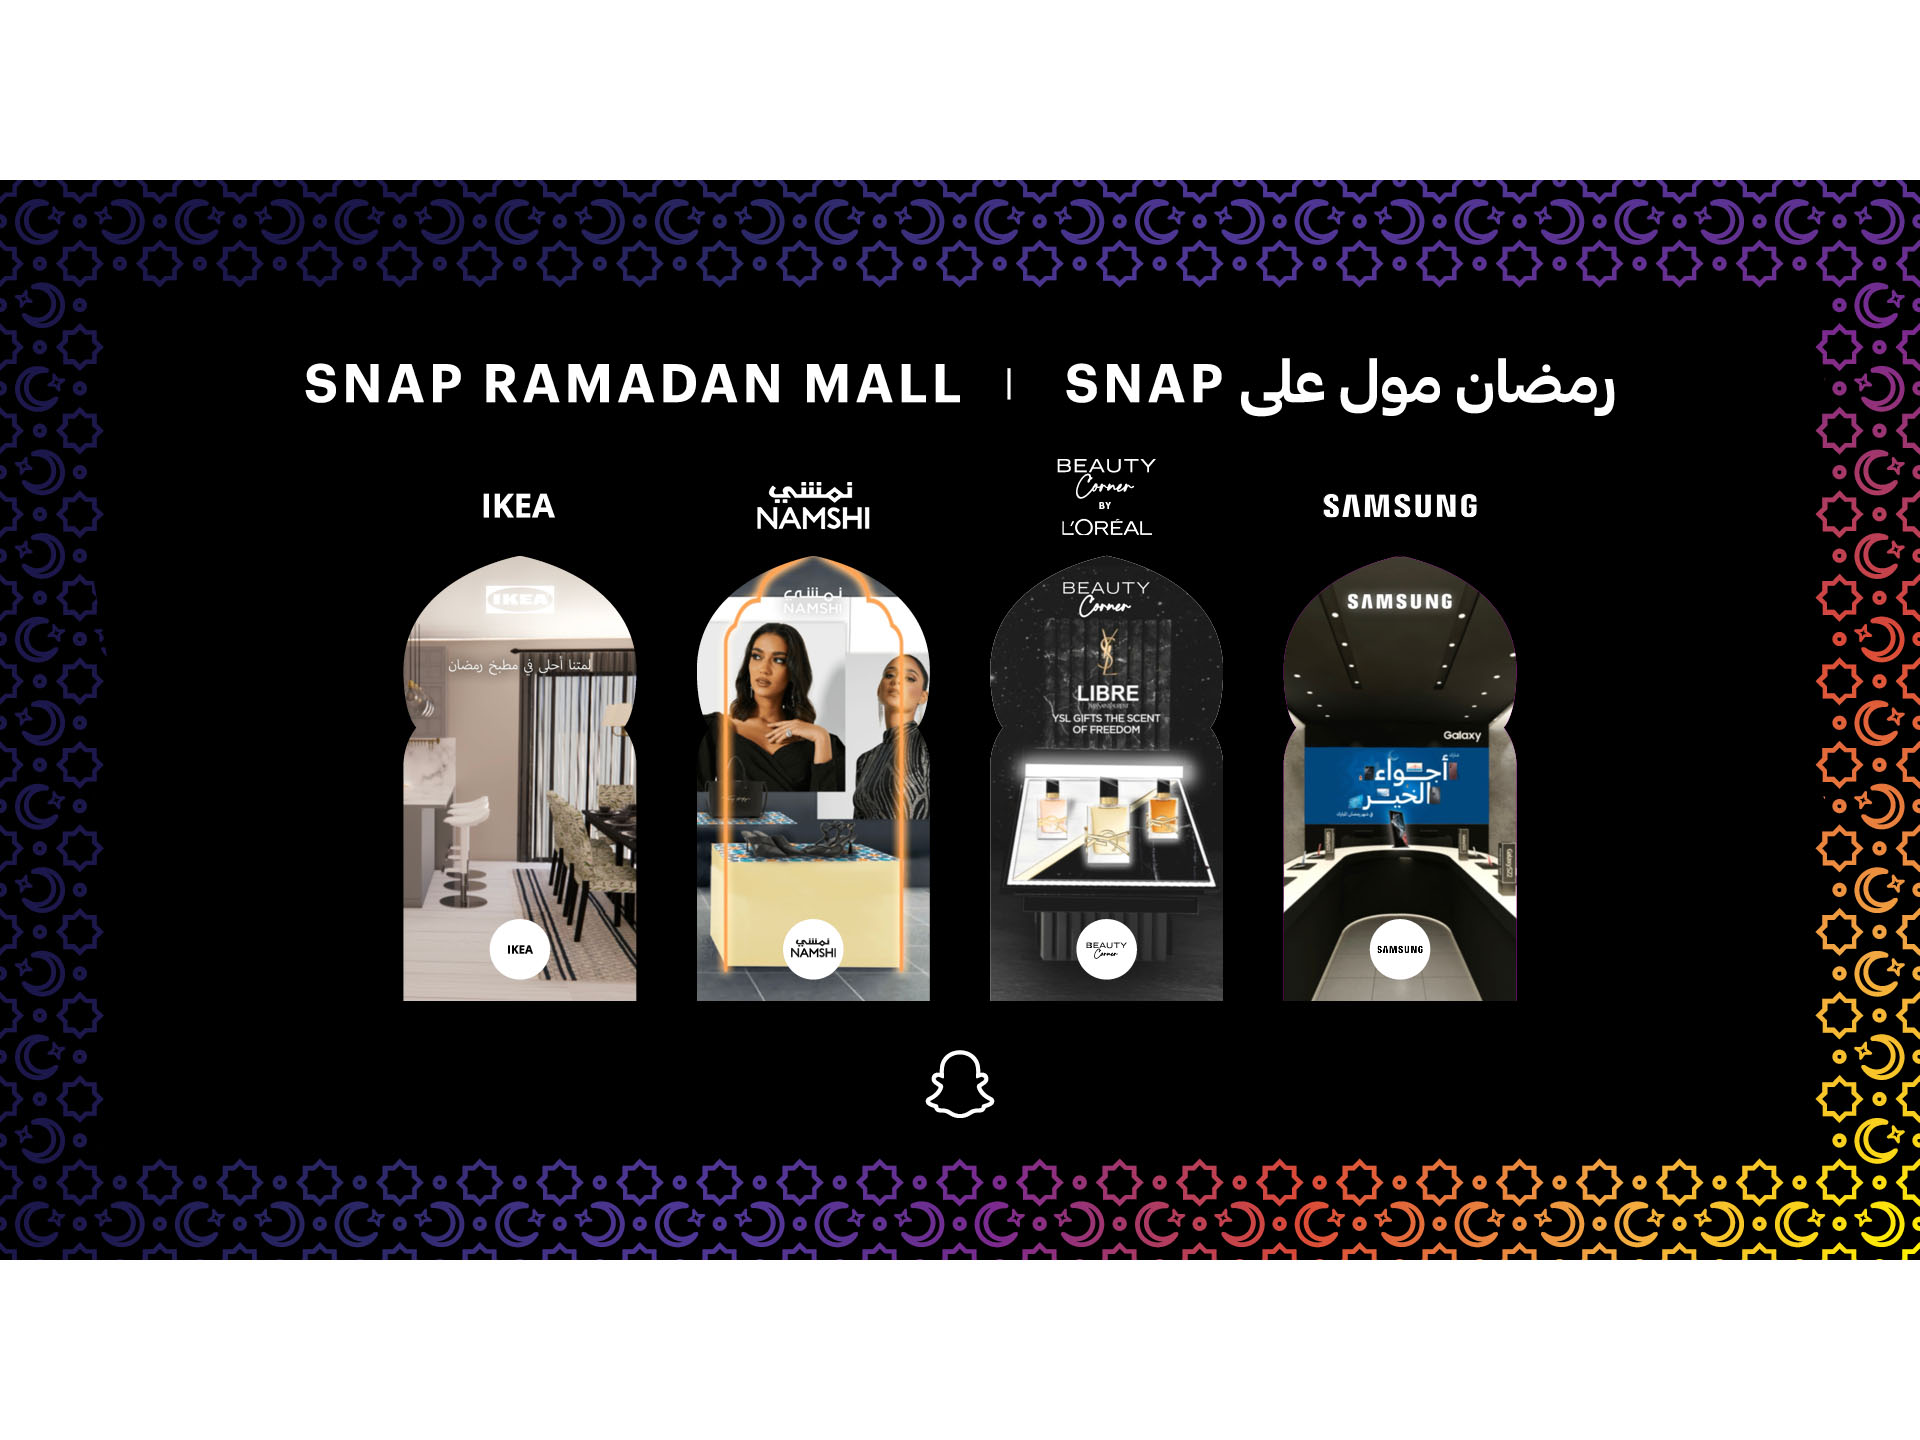 Snap introduces the first-ever AR-powered virtual mall in the MENA region